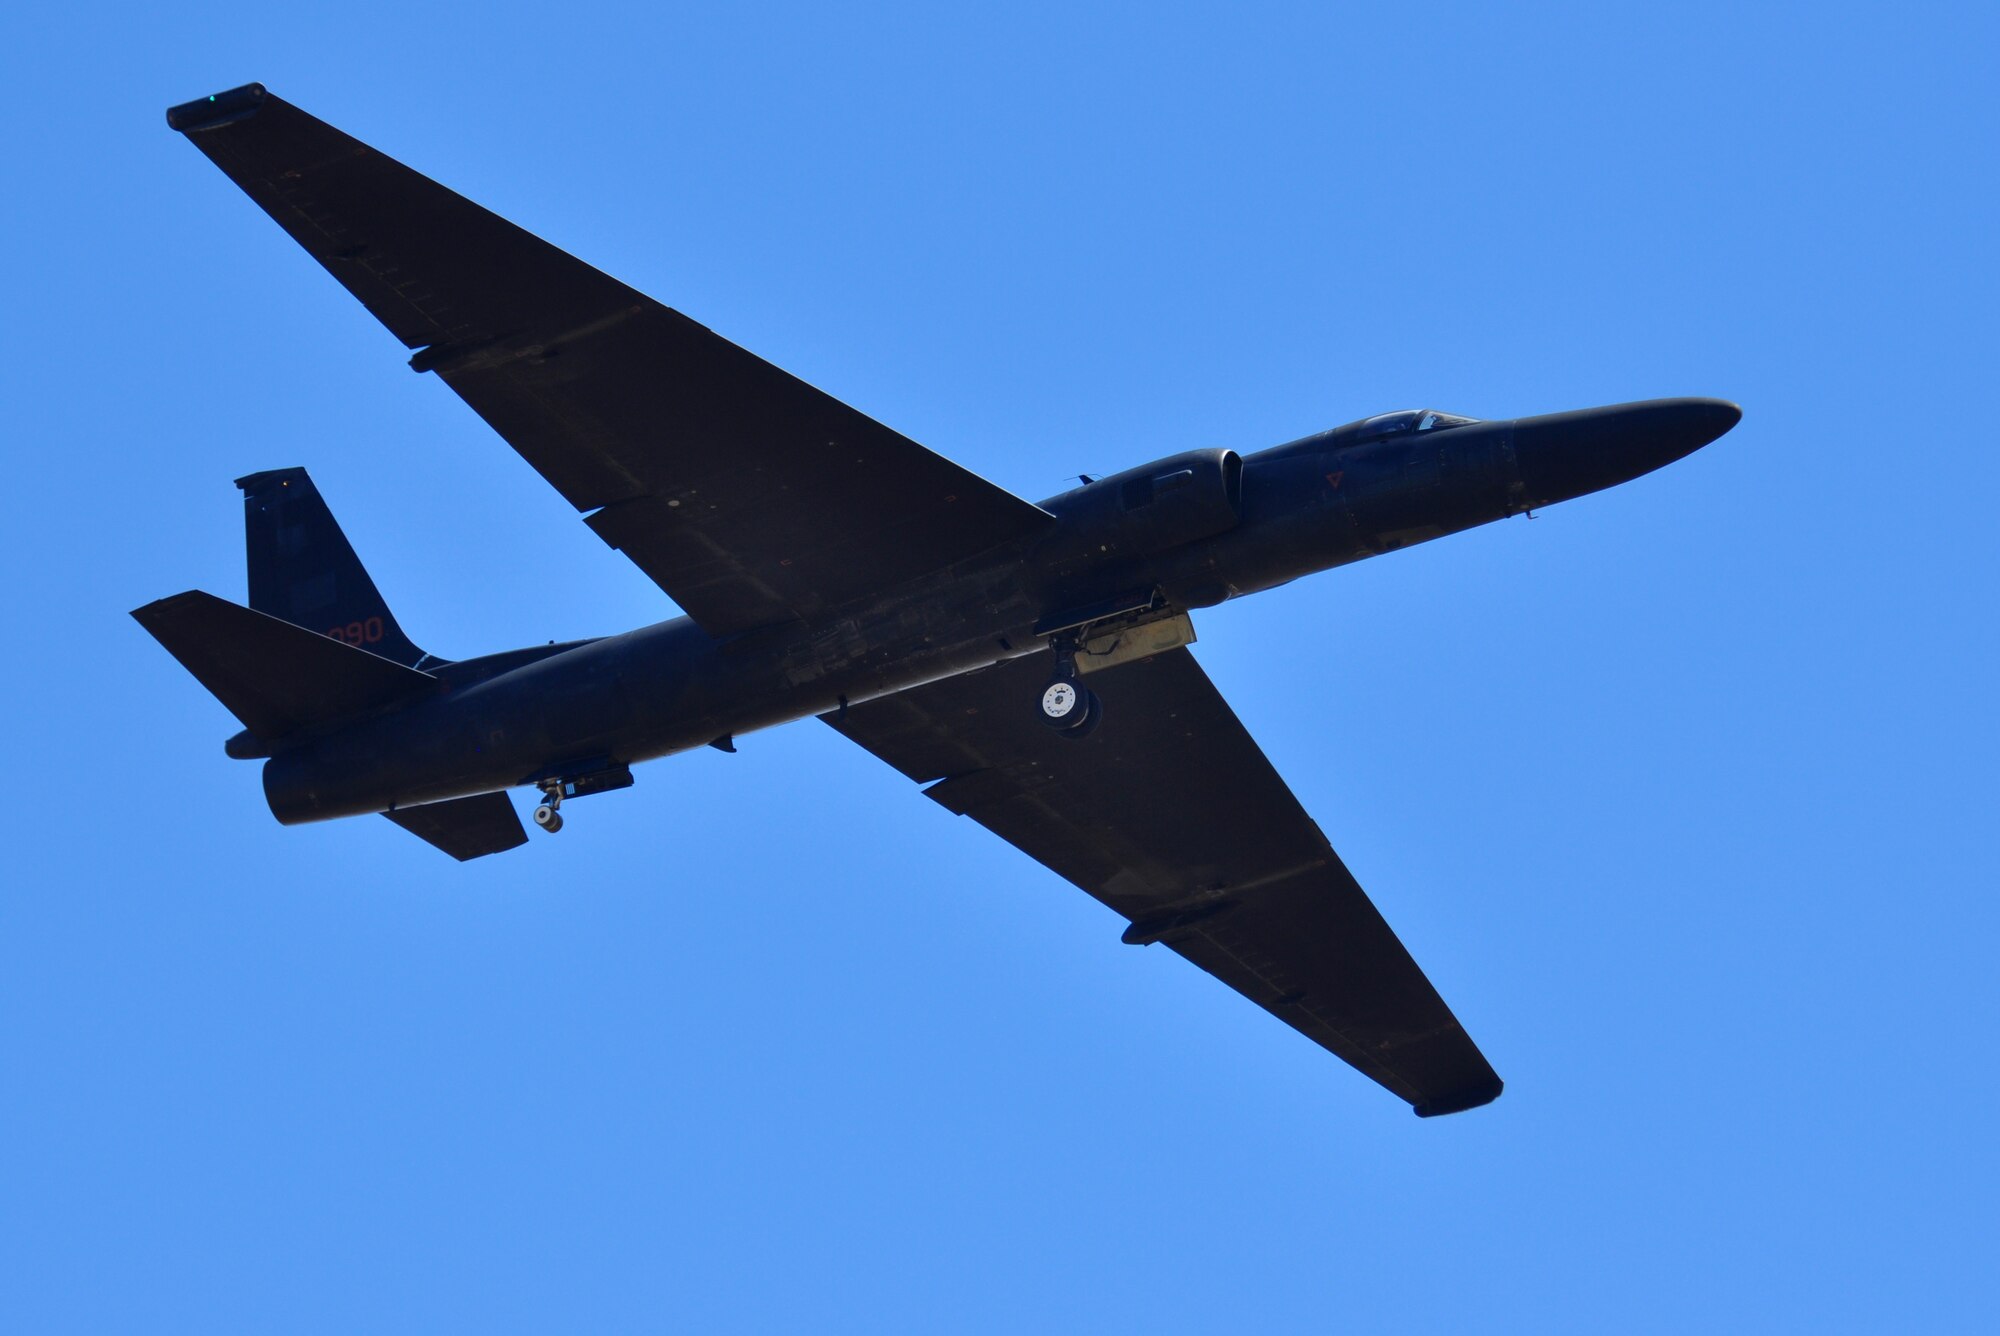 An Air Force U-2 Dragon Lady, Intelligence Reconnaissance and Surveillance aircraft from Beale Air Force Base performs a fly-over during the Capital City Air Show at Mather Airport, Sacramento, Calif., Sept. 8, 2012. The U-2 provides high-altitude, all-weather surveillance and reconnaissance for U.S. and allied forces. (U.S. Air Force photo by Staff Sgt. Robert M. Trujillo)